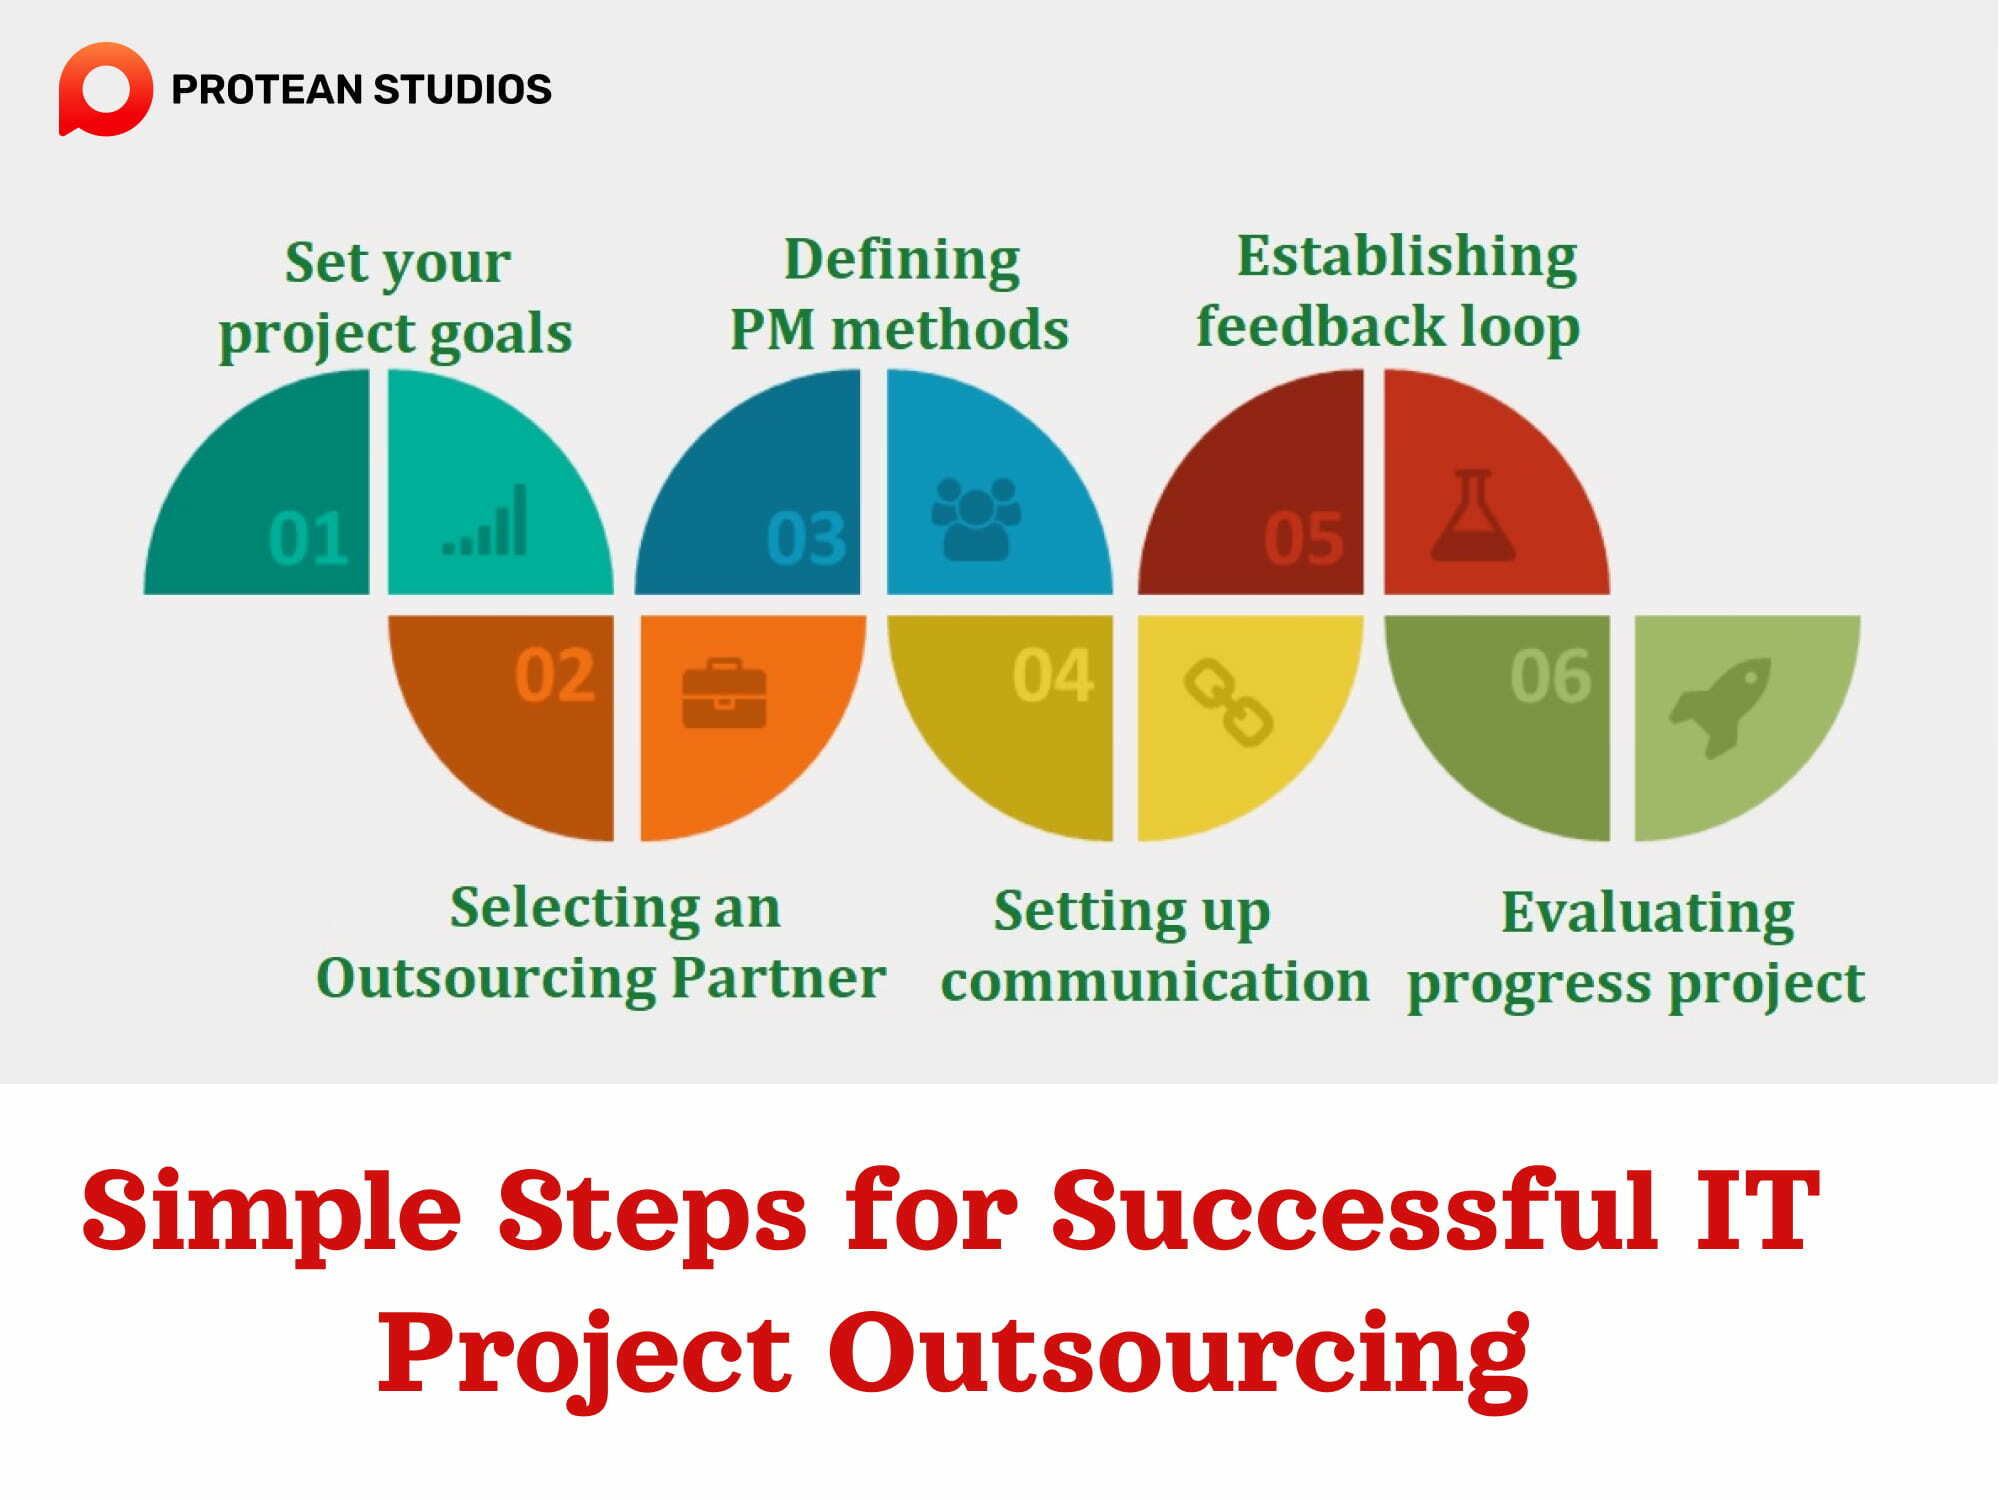 Selecting a good outsourcing partner